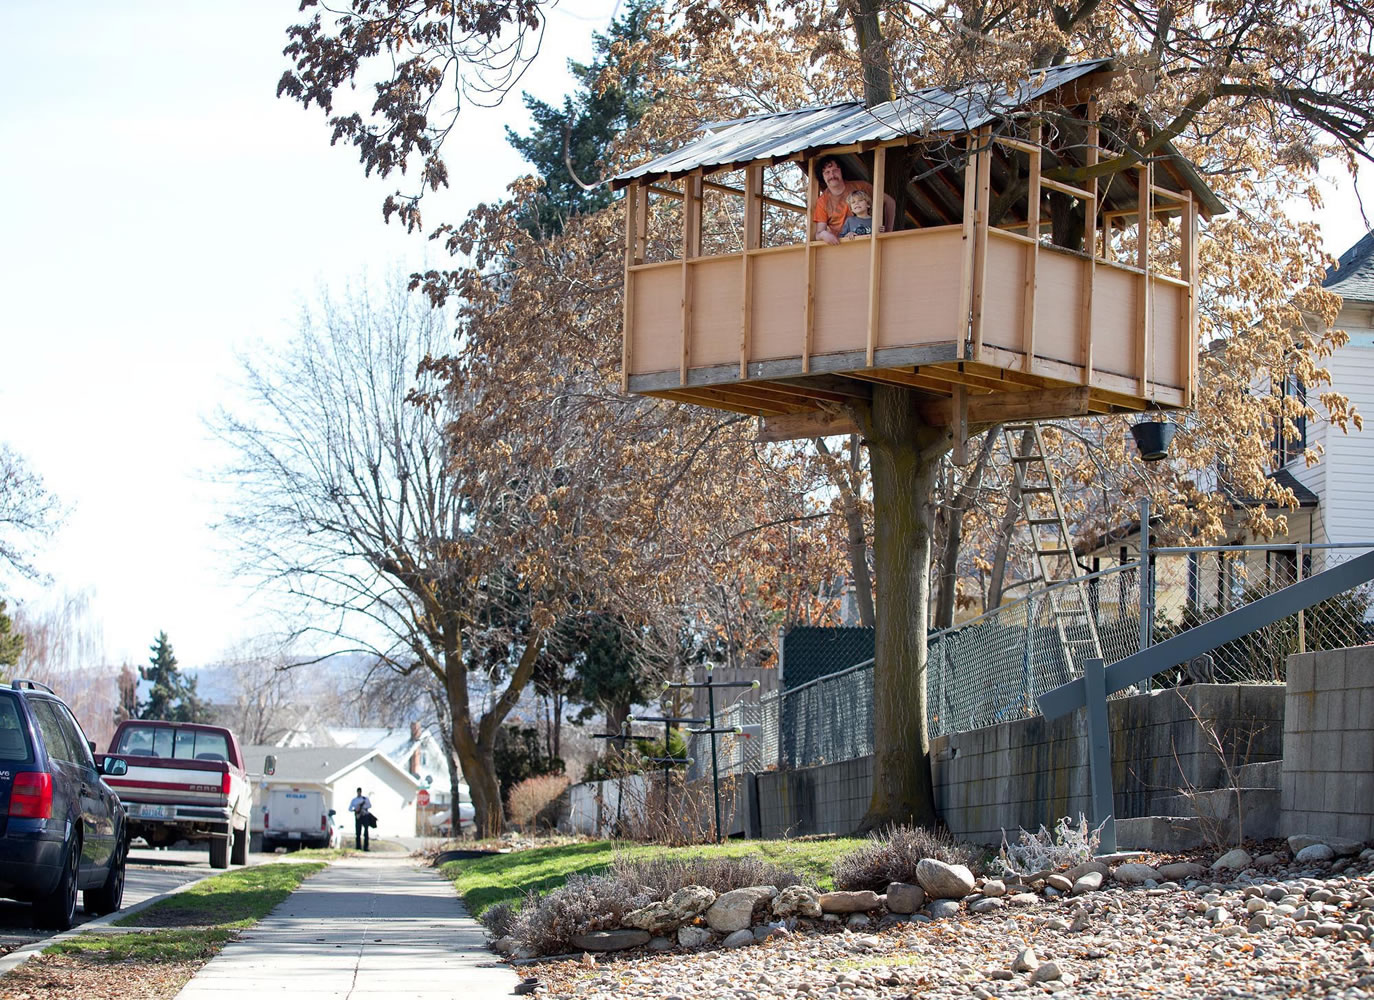 Zeb Postelwait sits in a treehouse outside his home in Wenatchee on March 11.